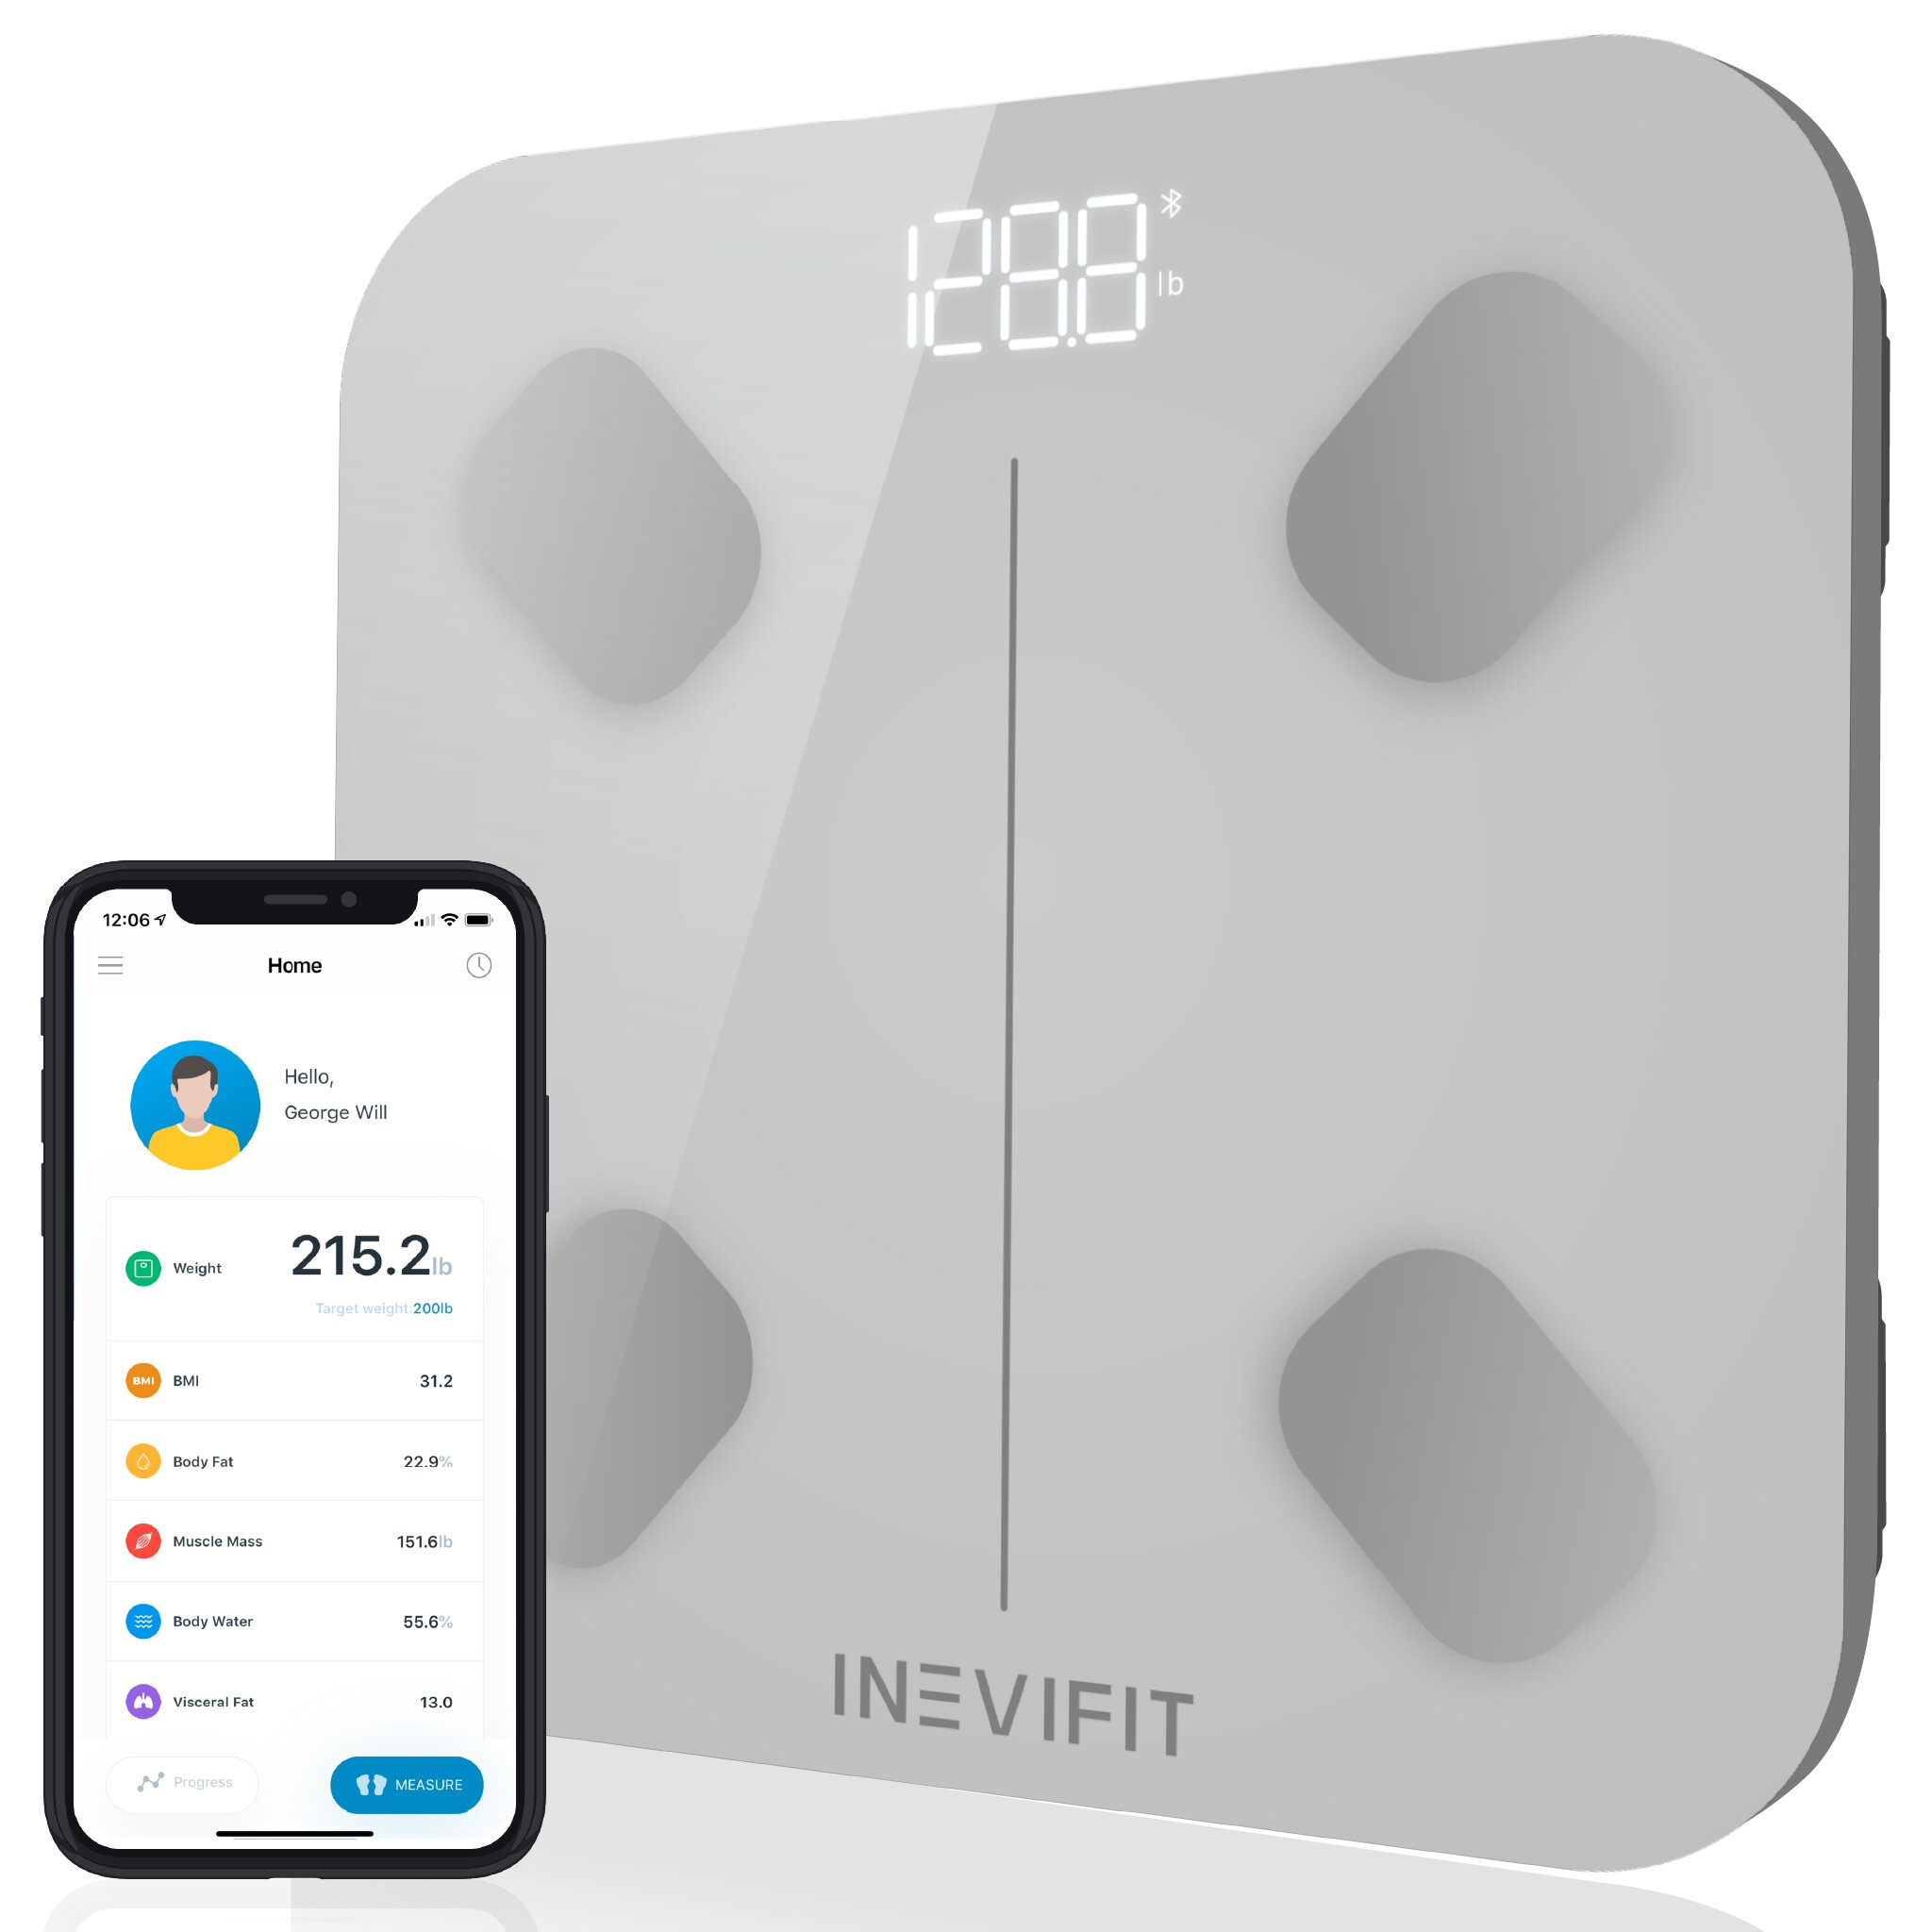 INEVIFIT Smart Body Fat Scale, Highly Accurate Bluetooth Digital Bathroom  Body Composition Analyzer, Measures Weight, Body Fat, Water, Muscle, BMI